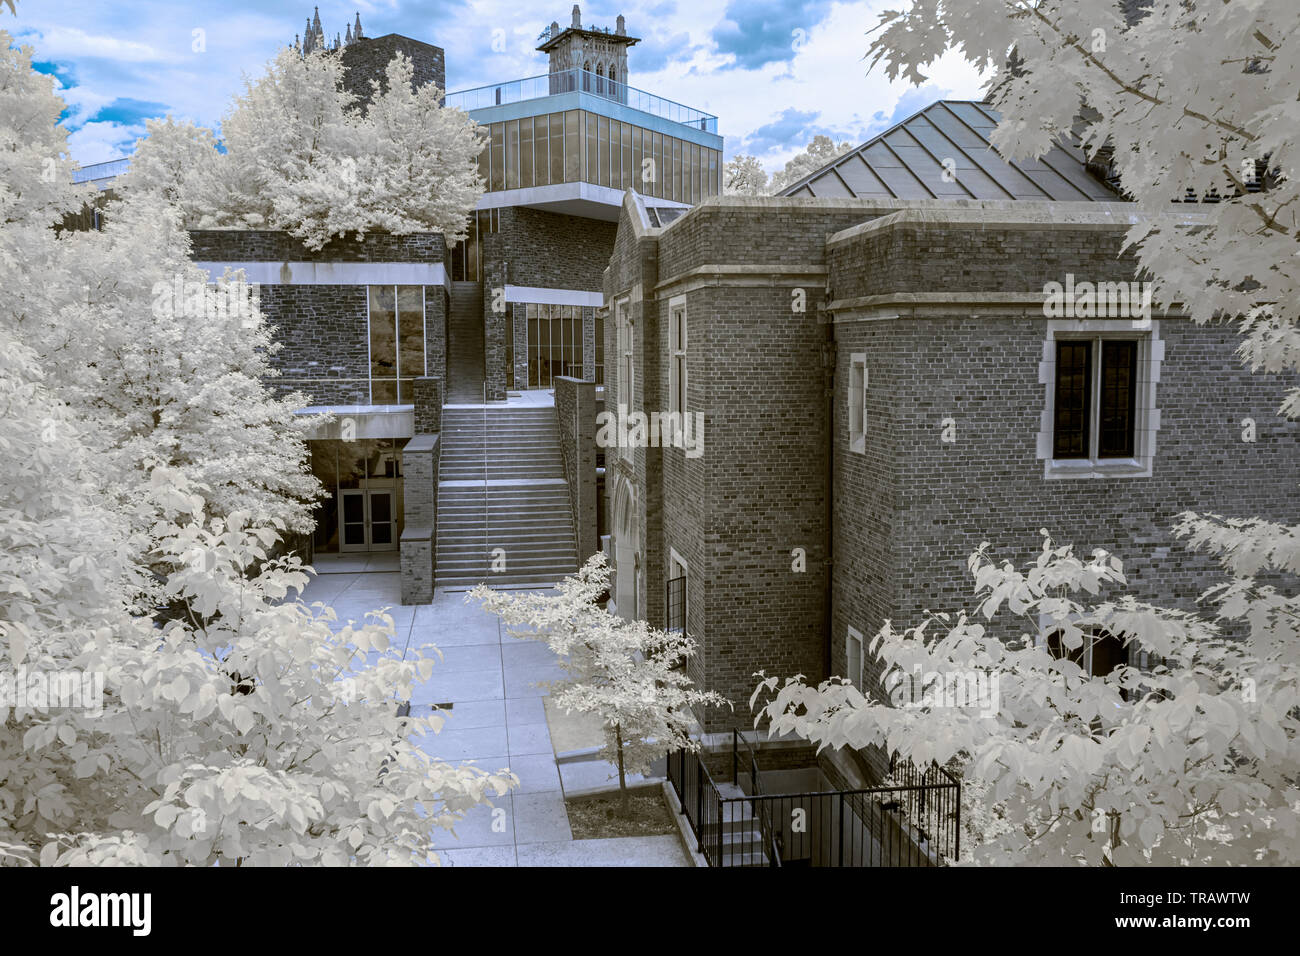 A courtyard amid stone buildings in a stark infrared photograph Stock Photo